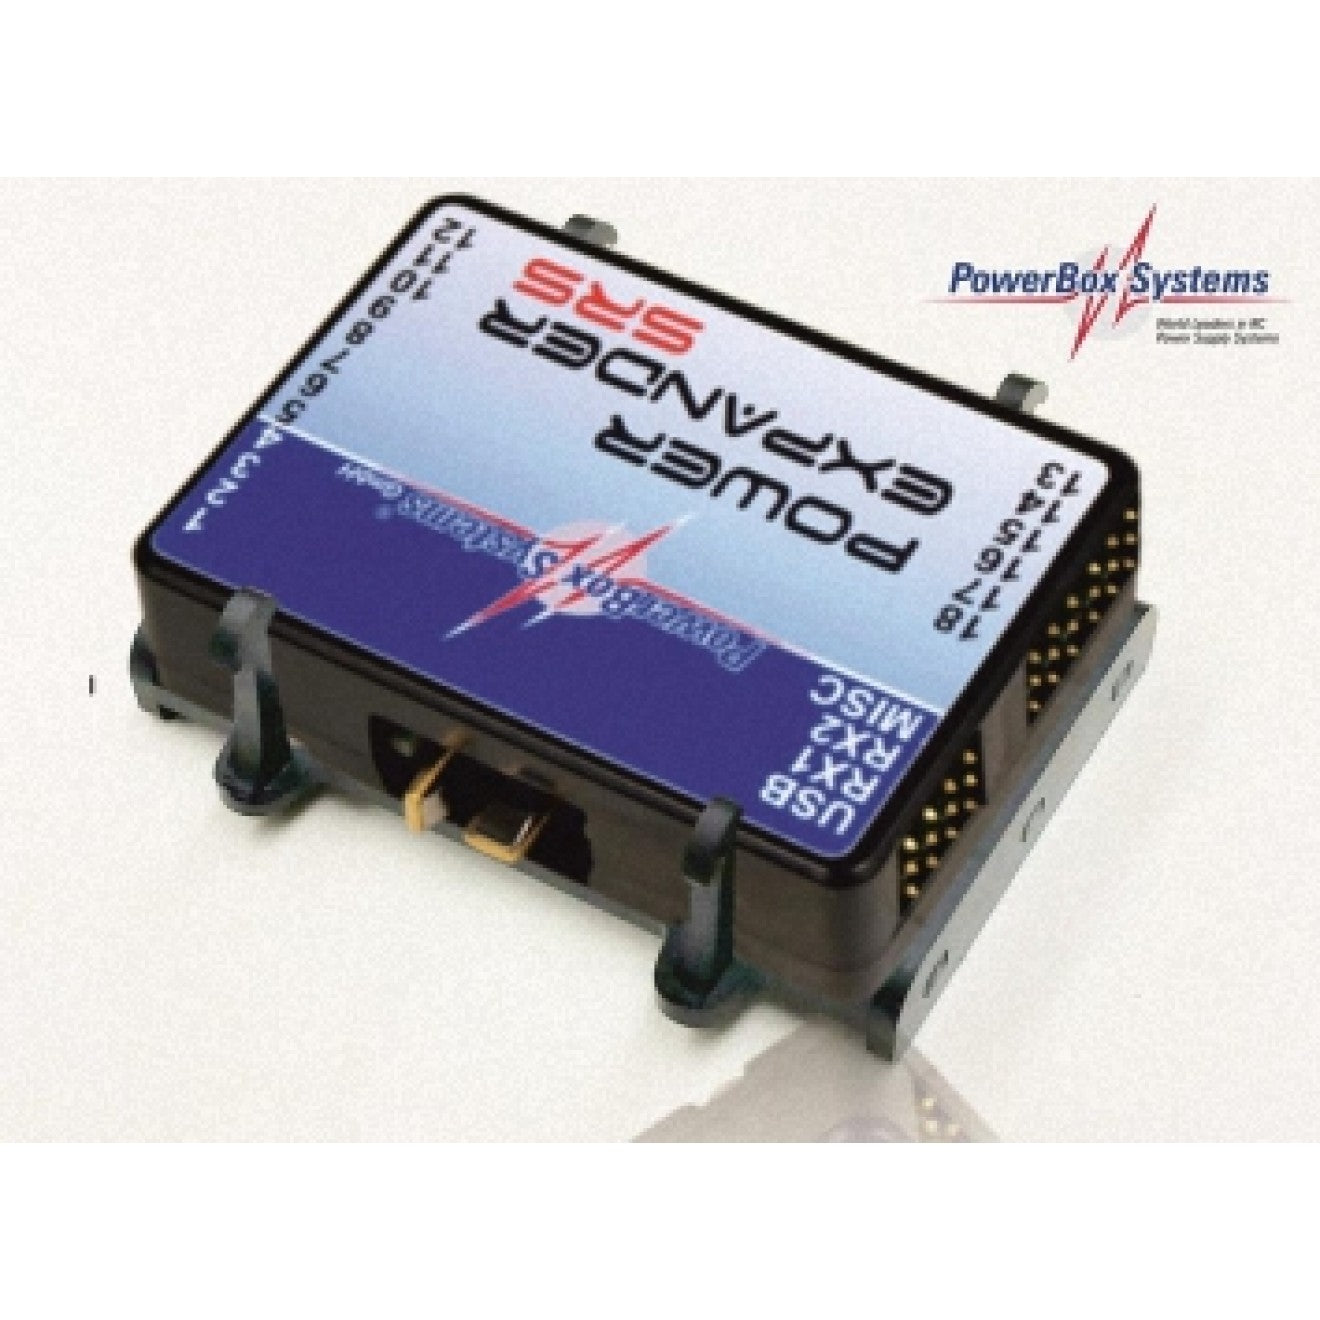 PowerBox Systems PowerExpander SRS Click Holder from STV-Tech 021-06